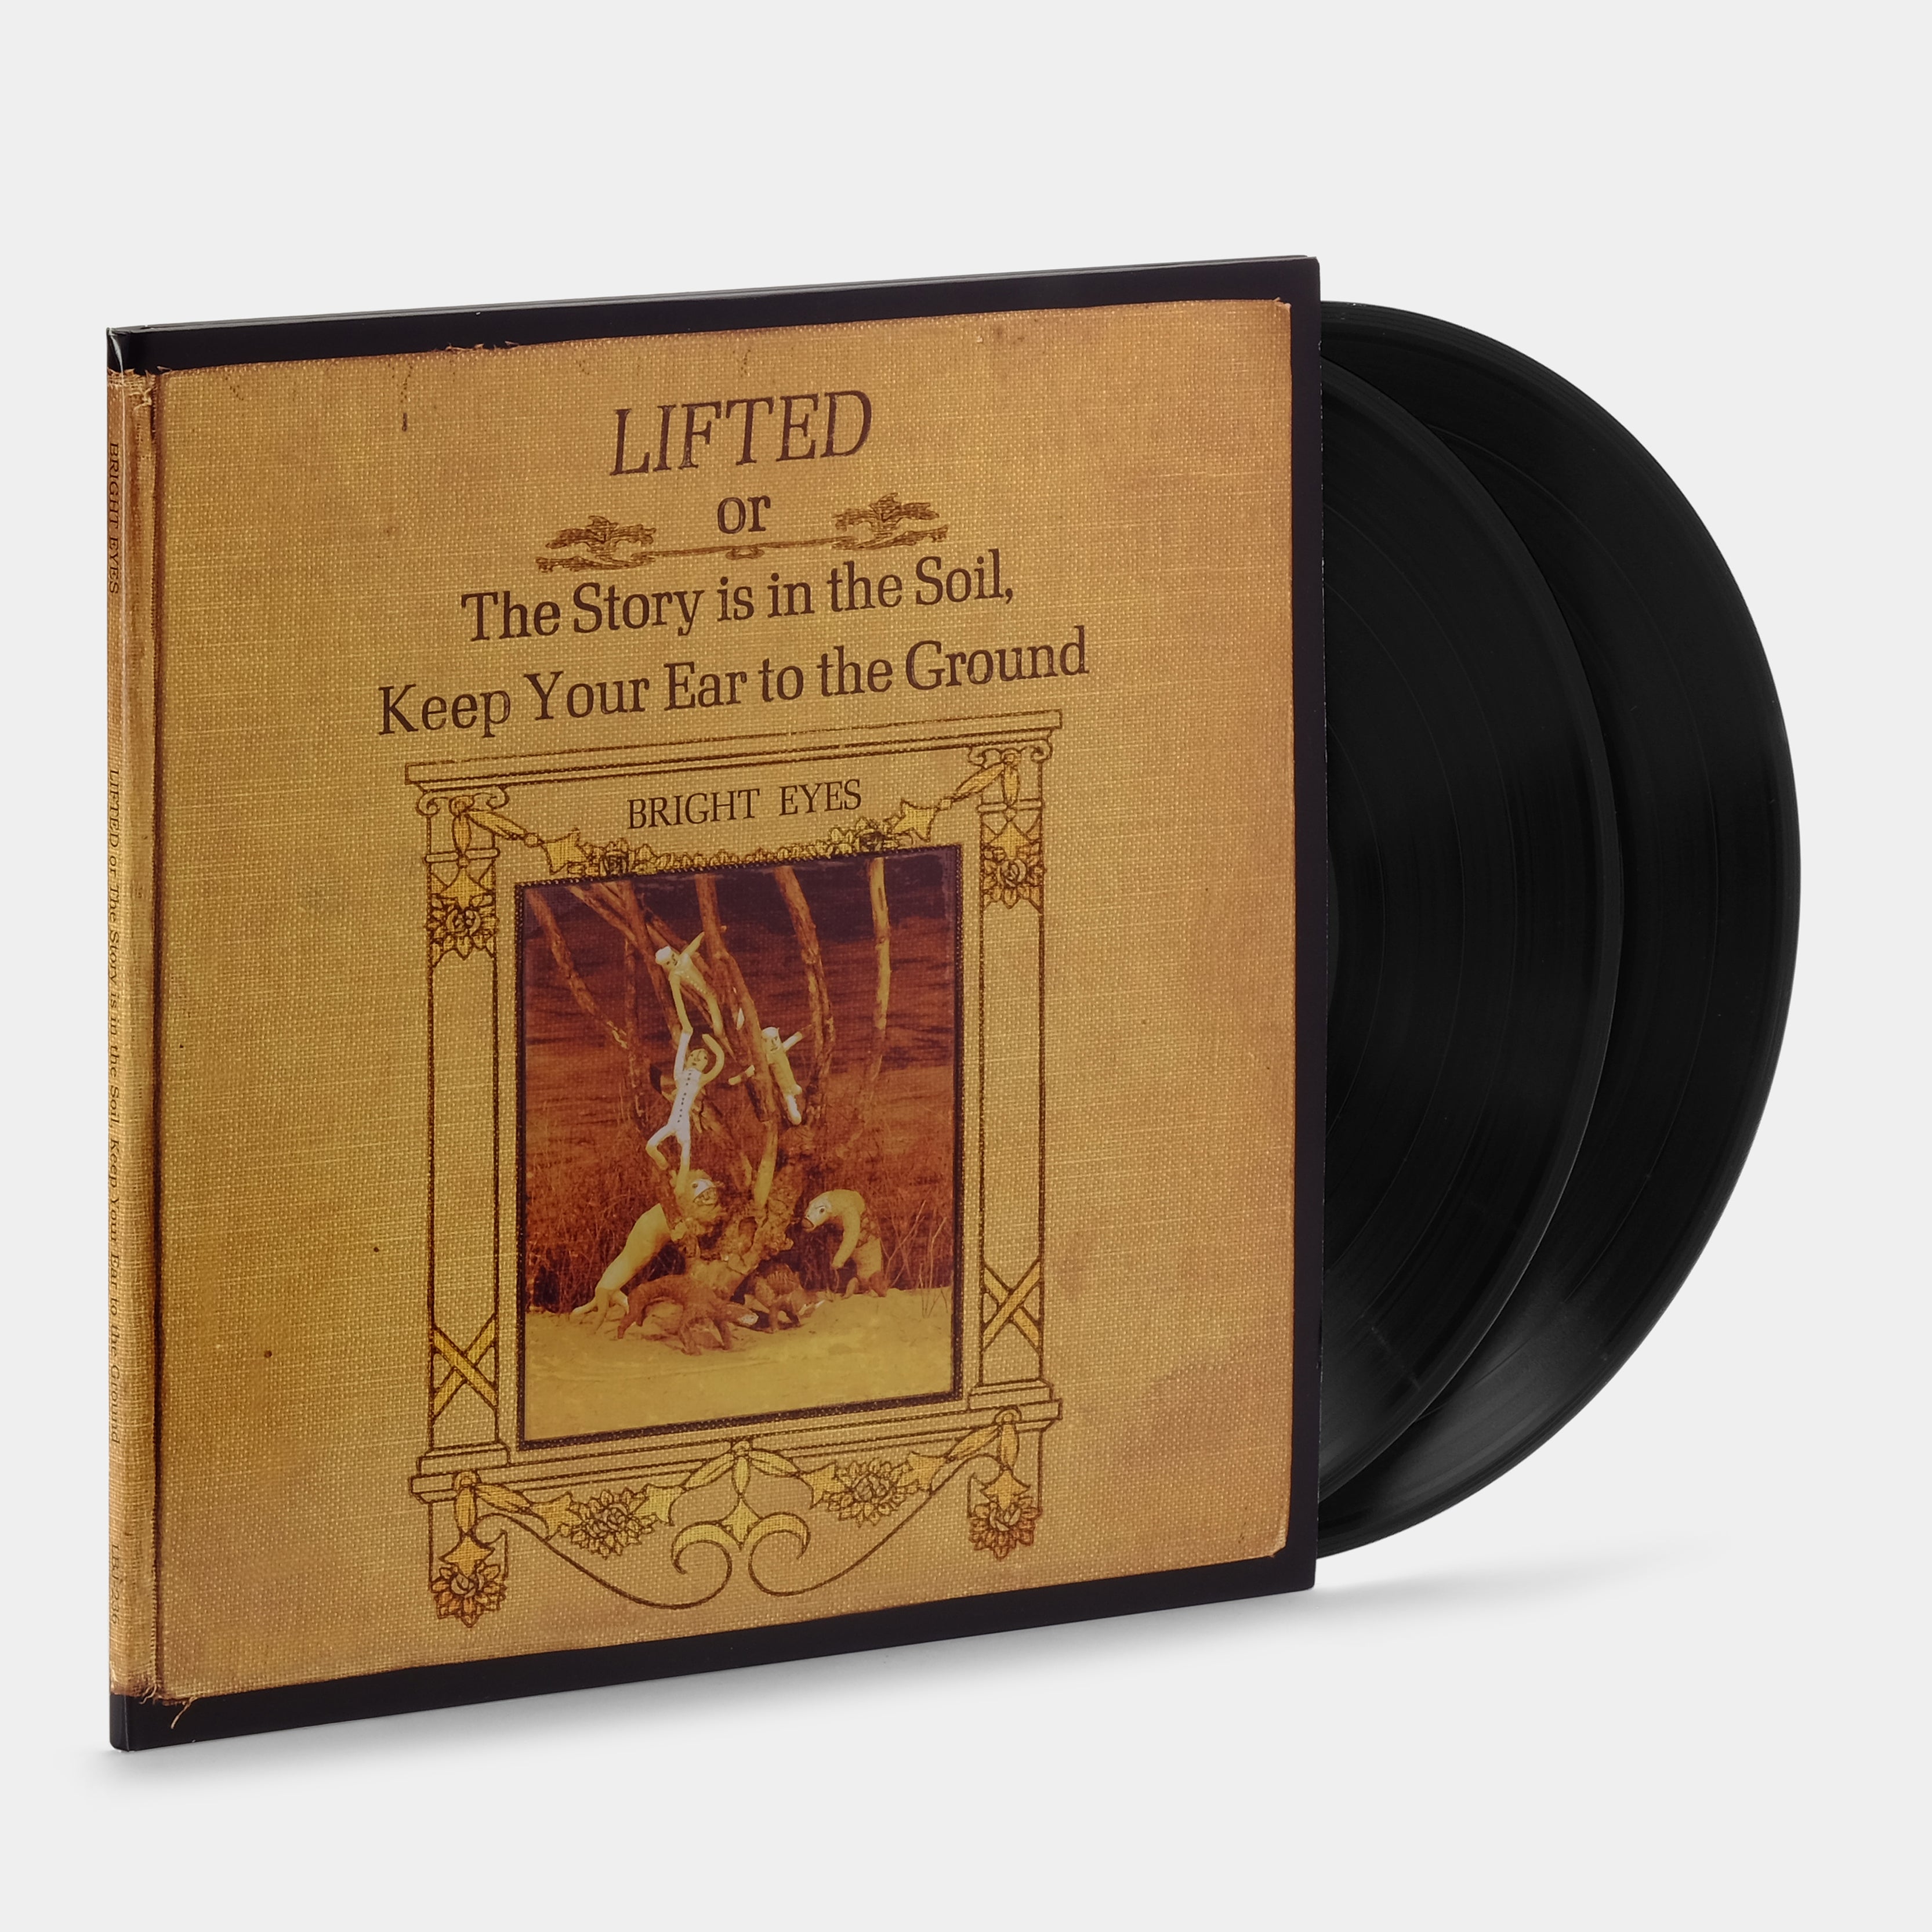 Bright Eyes - Lifted Or The Story Is In The Soil, Keep Your Ear To The Ground Remastered 2xLP Vinyl Record